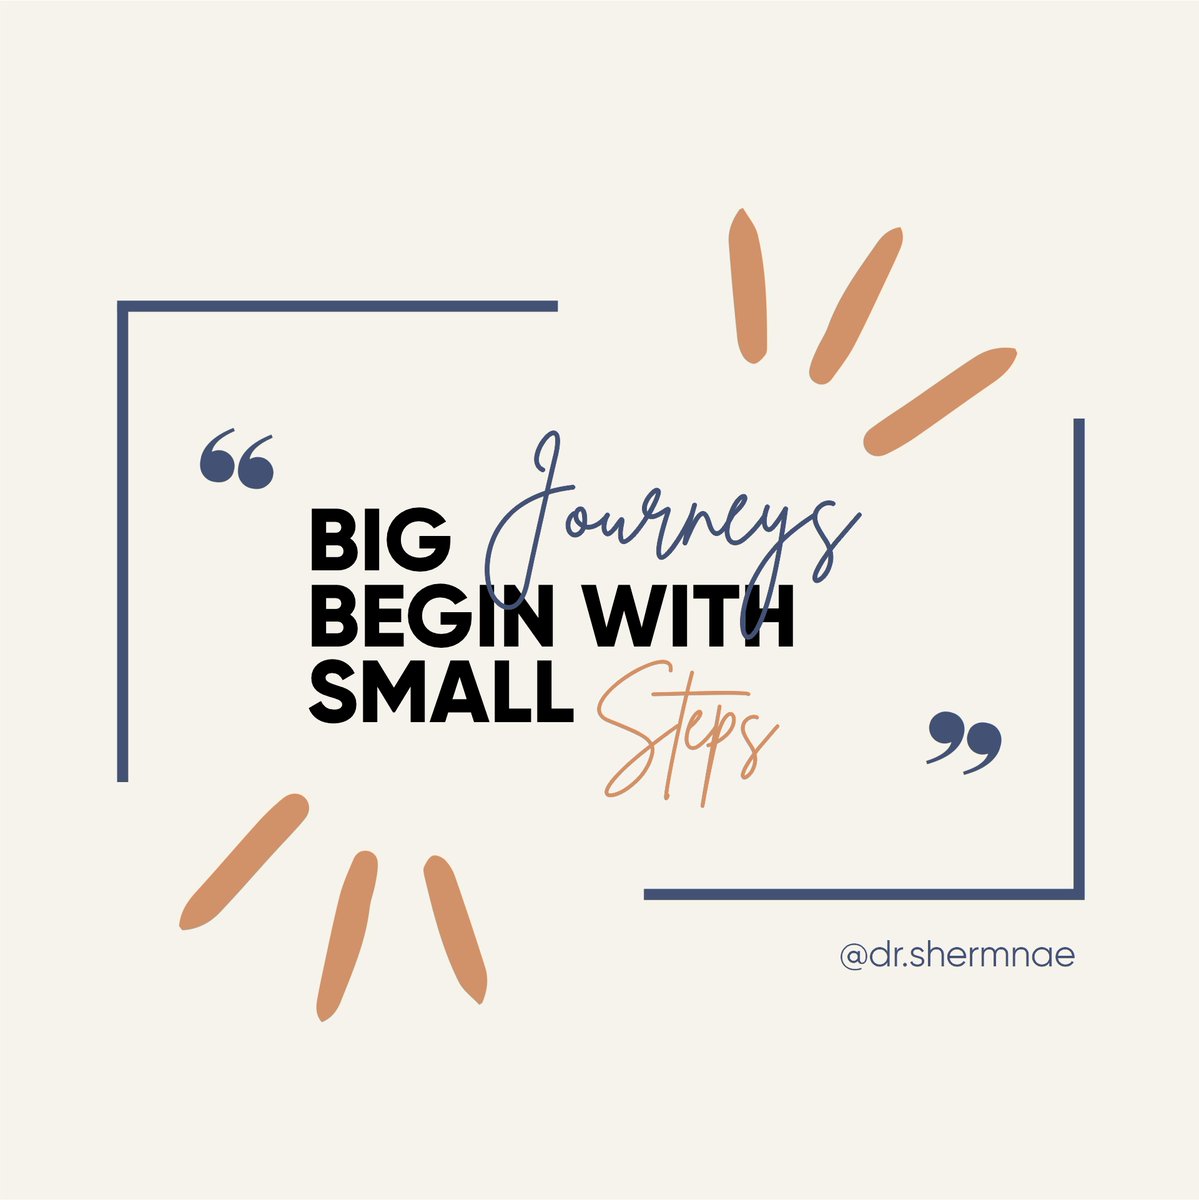 Starting small, but dreaming big! Every big journey starts with those tiny steps forward.

#dreambig #smallsteps #journeyahead #drshermnae #personalcoach #success #business #inspiration #selflove #alignment #transformation #meditation #empaths #selfempowerment #vulnerability